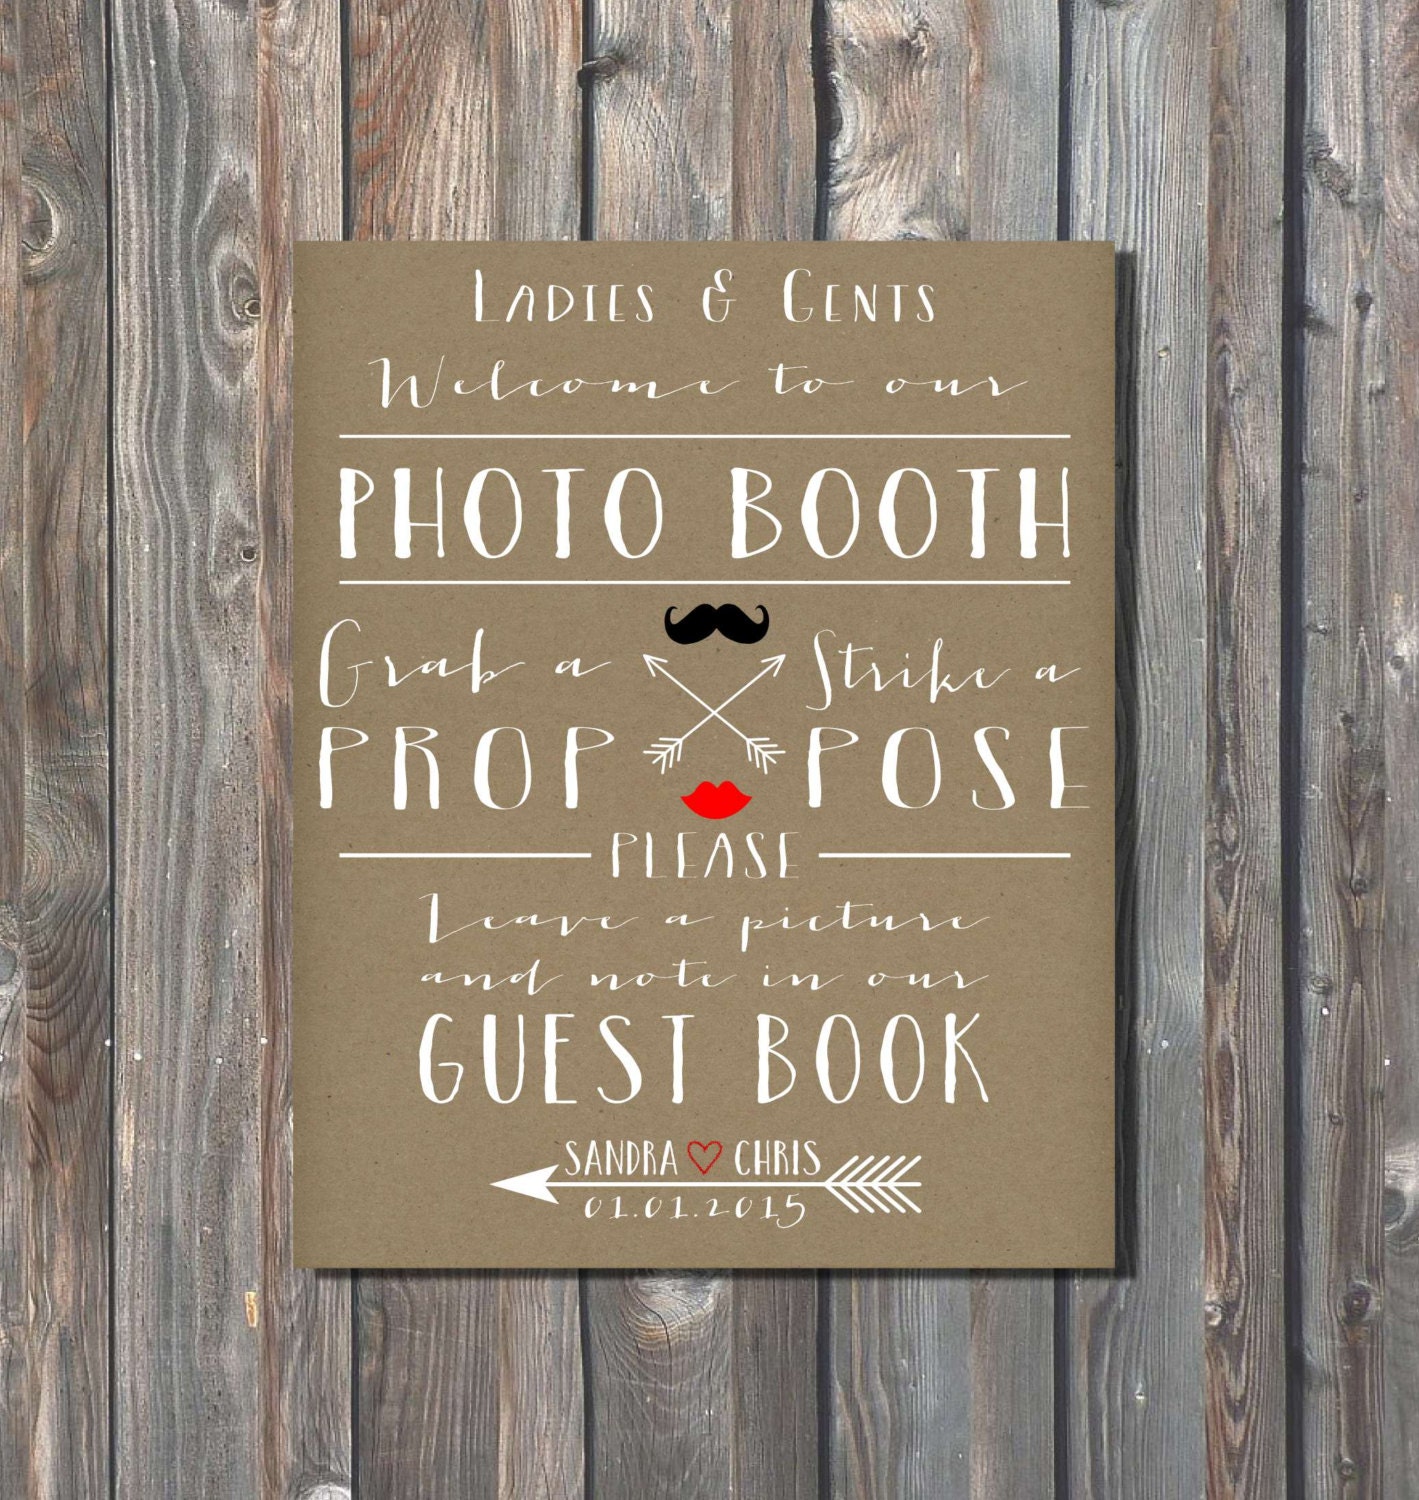 Personalized Wedding Photo Booth SignPhoto by HappyFiestaDesign